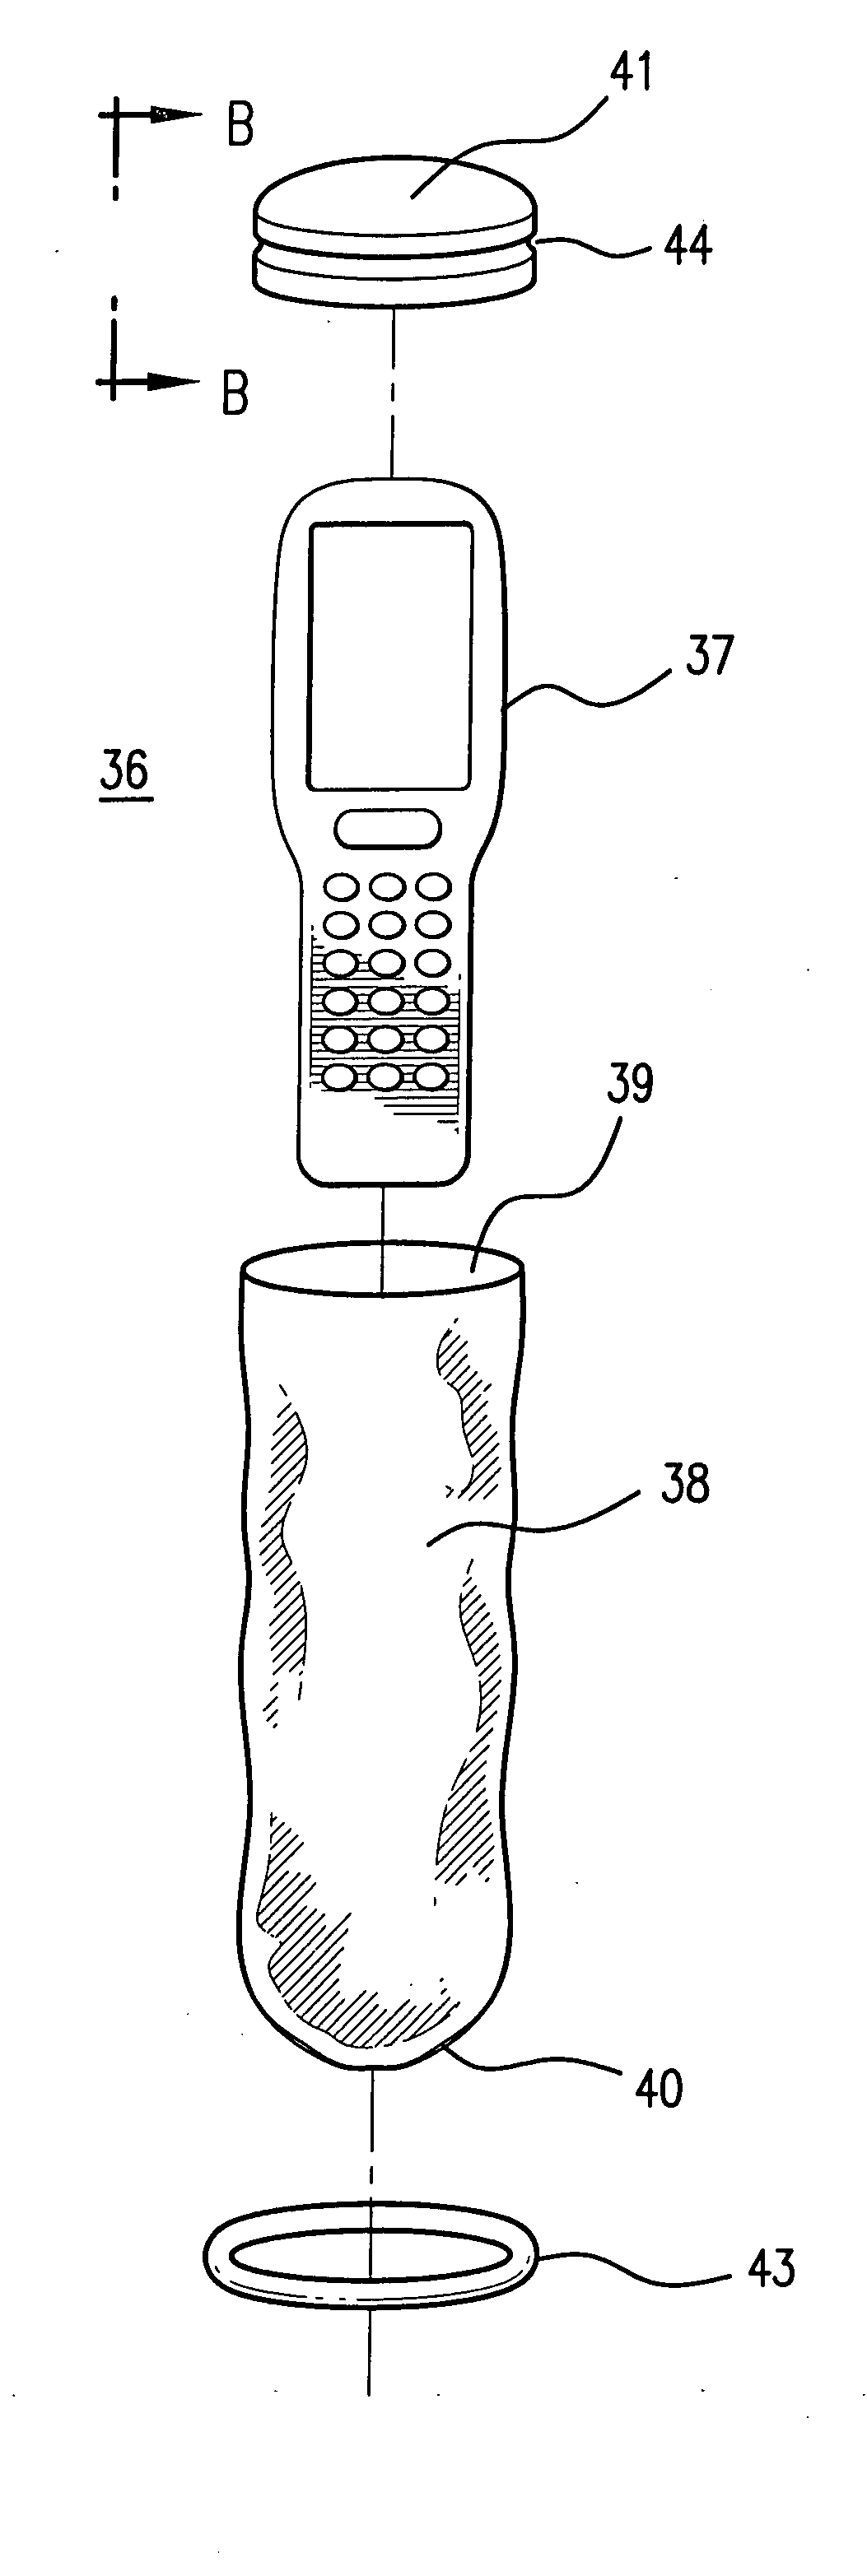 Data collection device enclosure